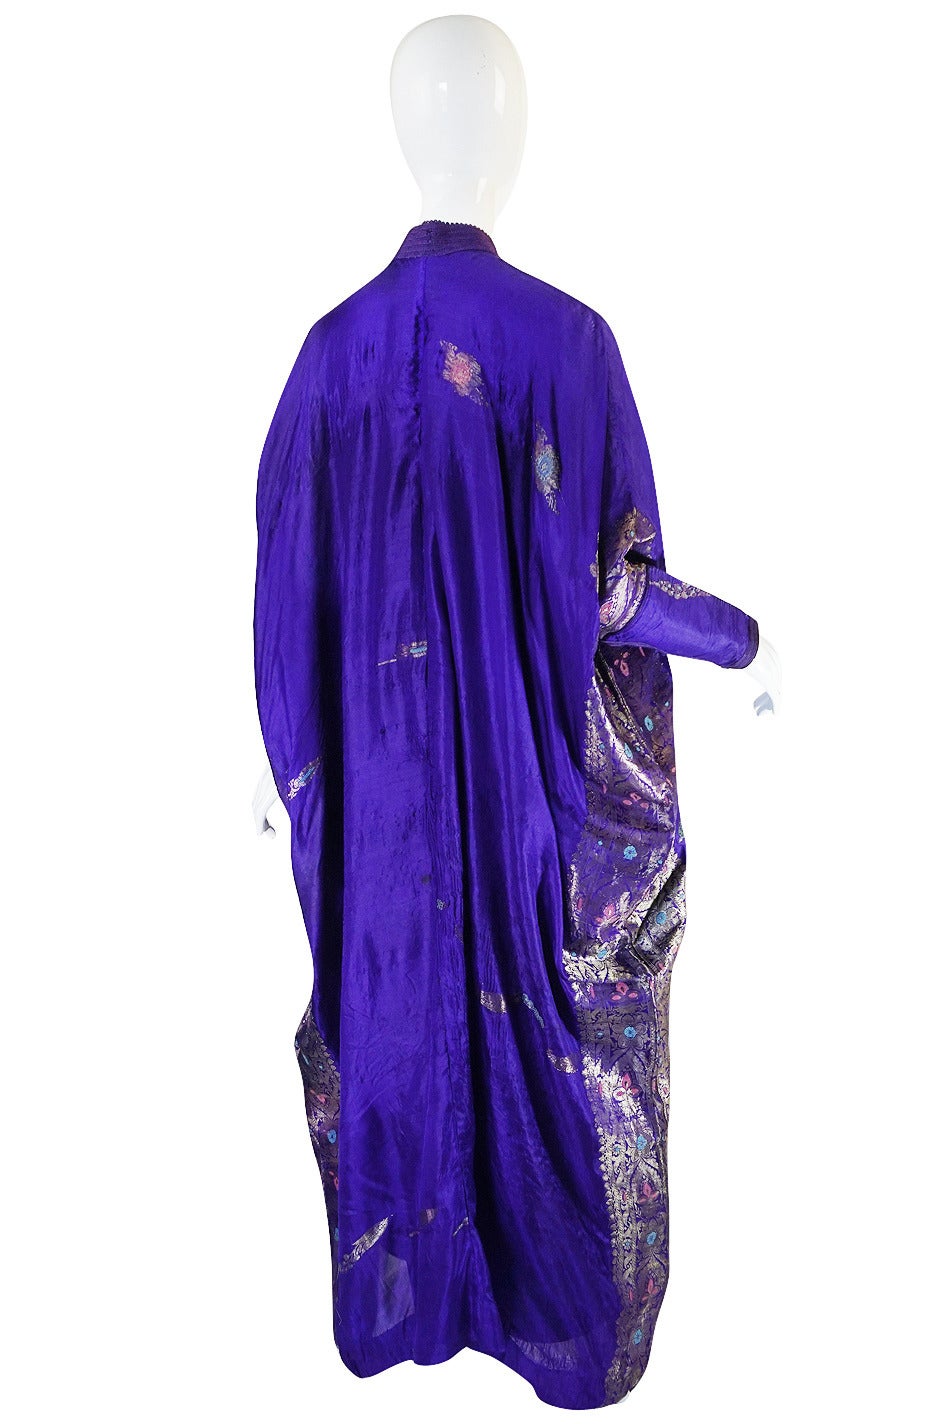 This amazing 1960s silk caftan has no designer label but easily could have as it is well done. The workmanship is very fine and the quality high. It has a inner jersey dress identifying it as being made in the late 60s, early seventies but the